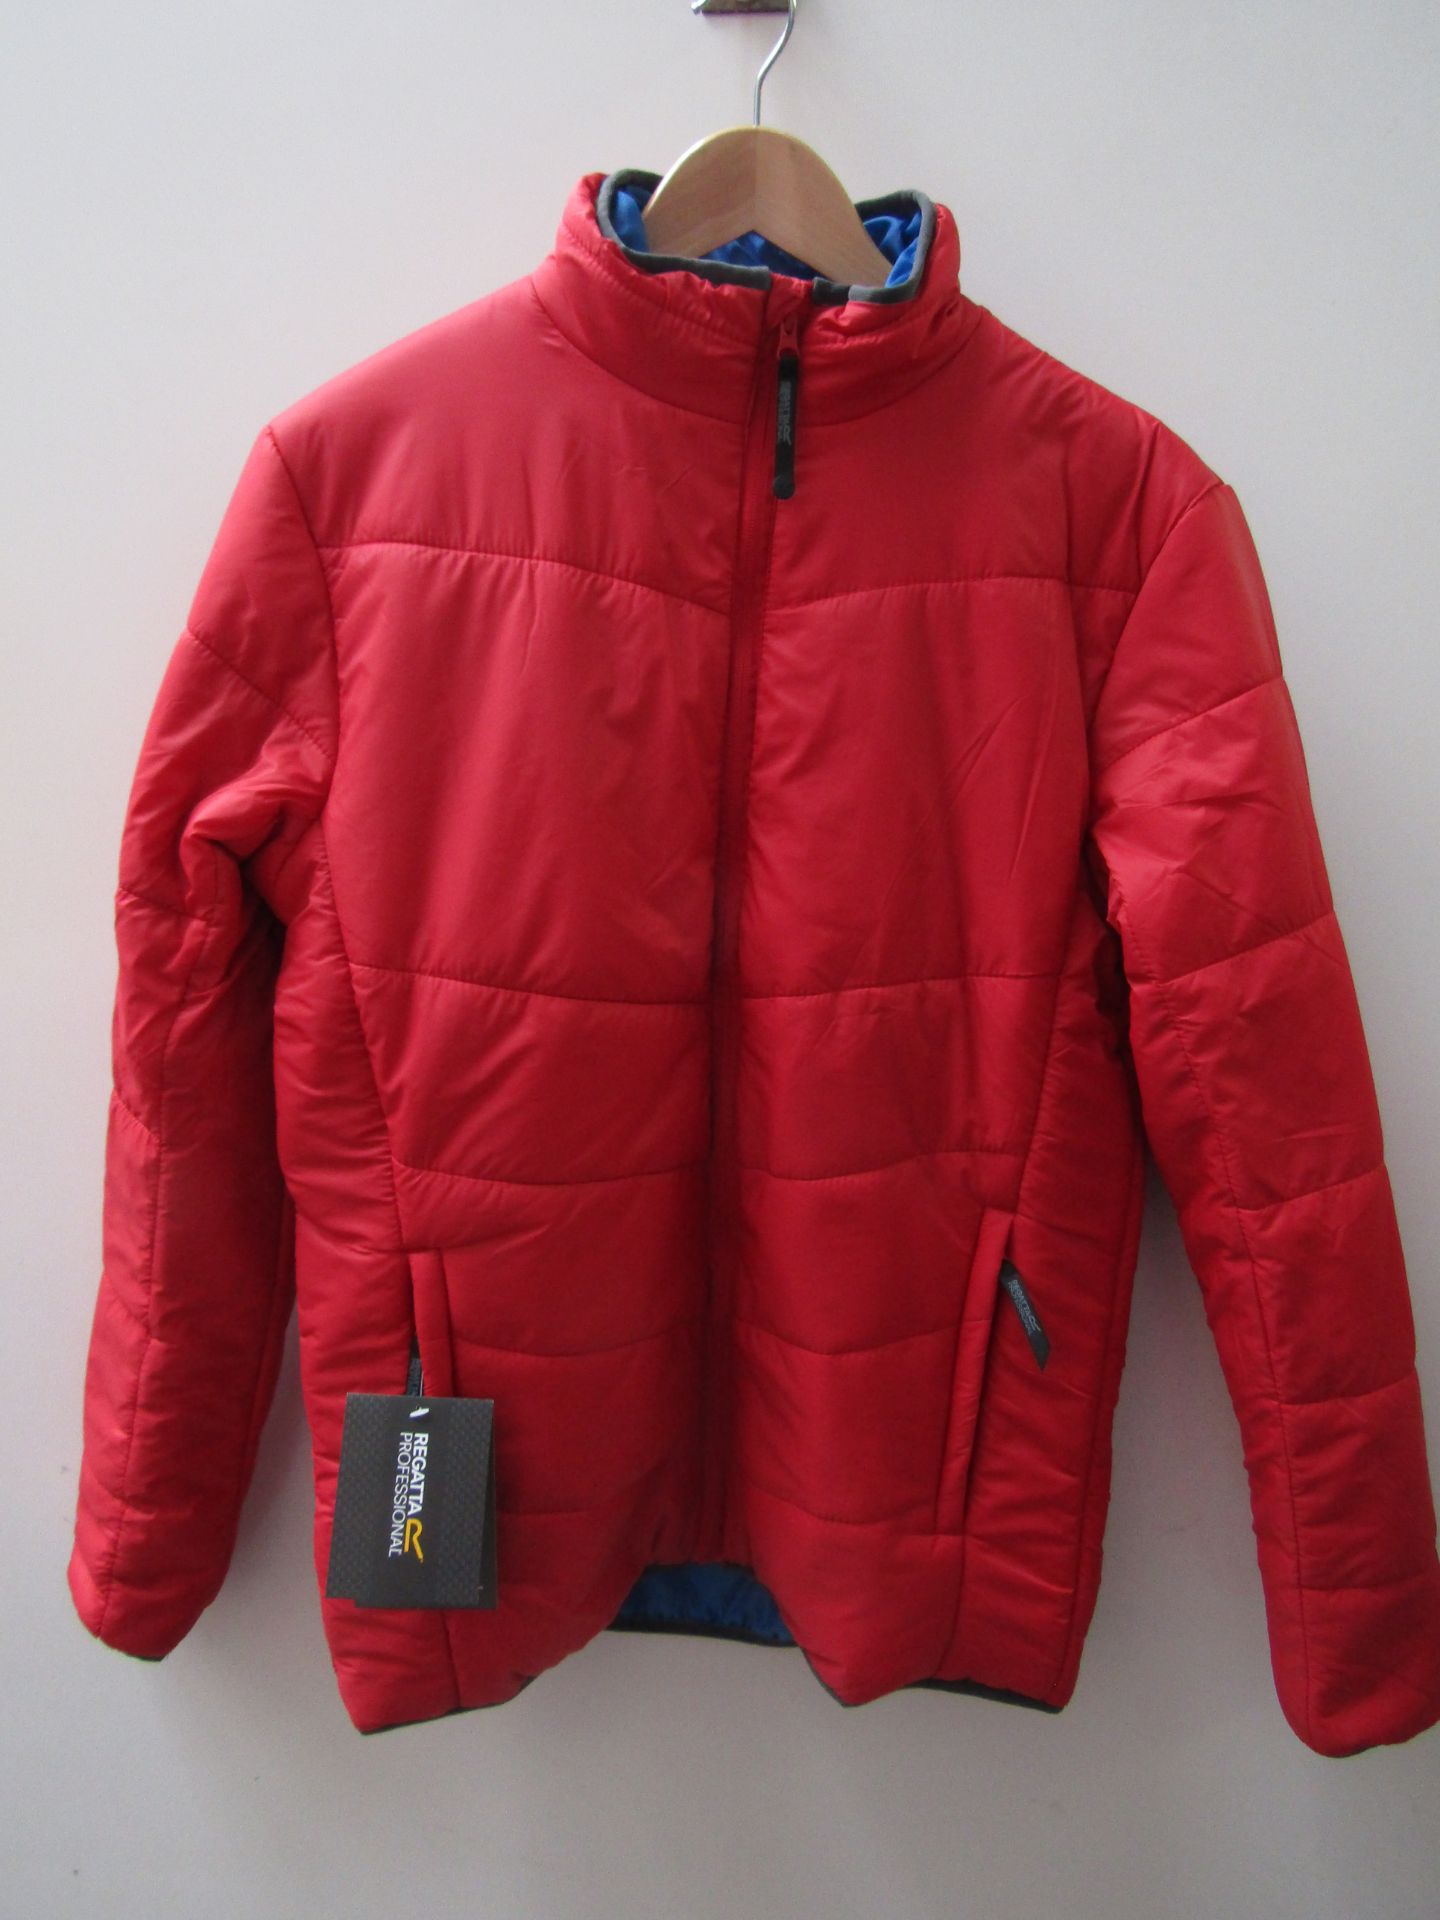 Regatta Professional, jacket Red 100% Polyamide outer 100% Polyester lining & padding size XL new in